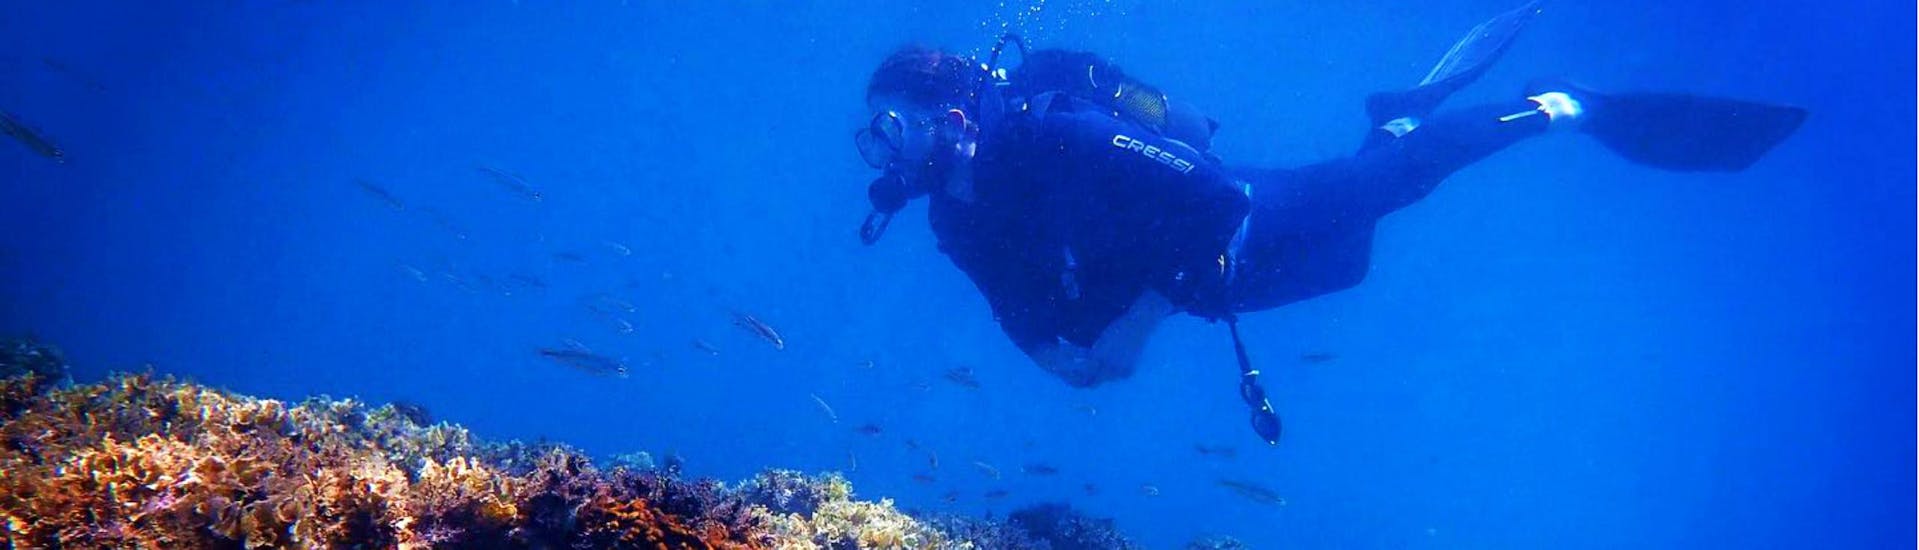 A diver exploring the depths of the Cretan Sea in a diving lesson with the experienced instructors from Evelin Dive Center.